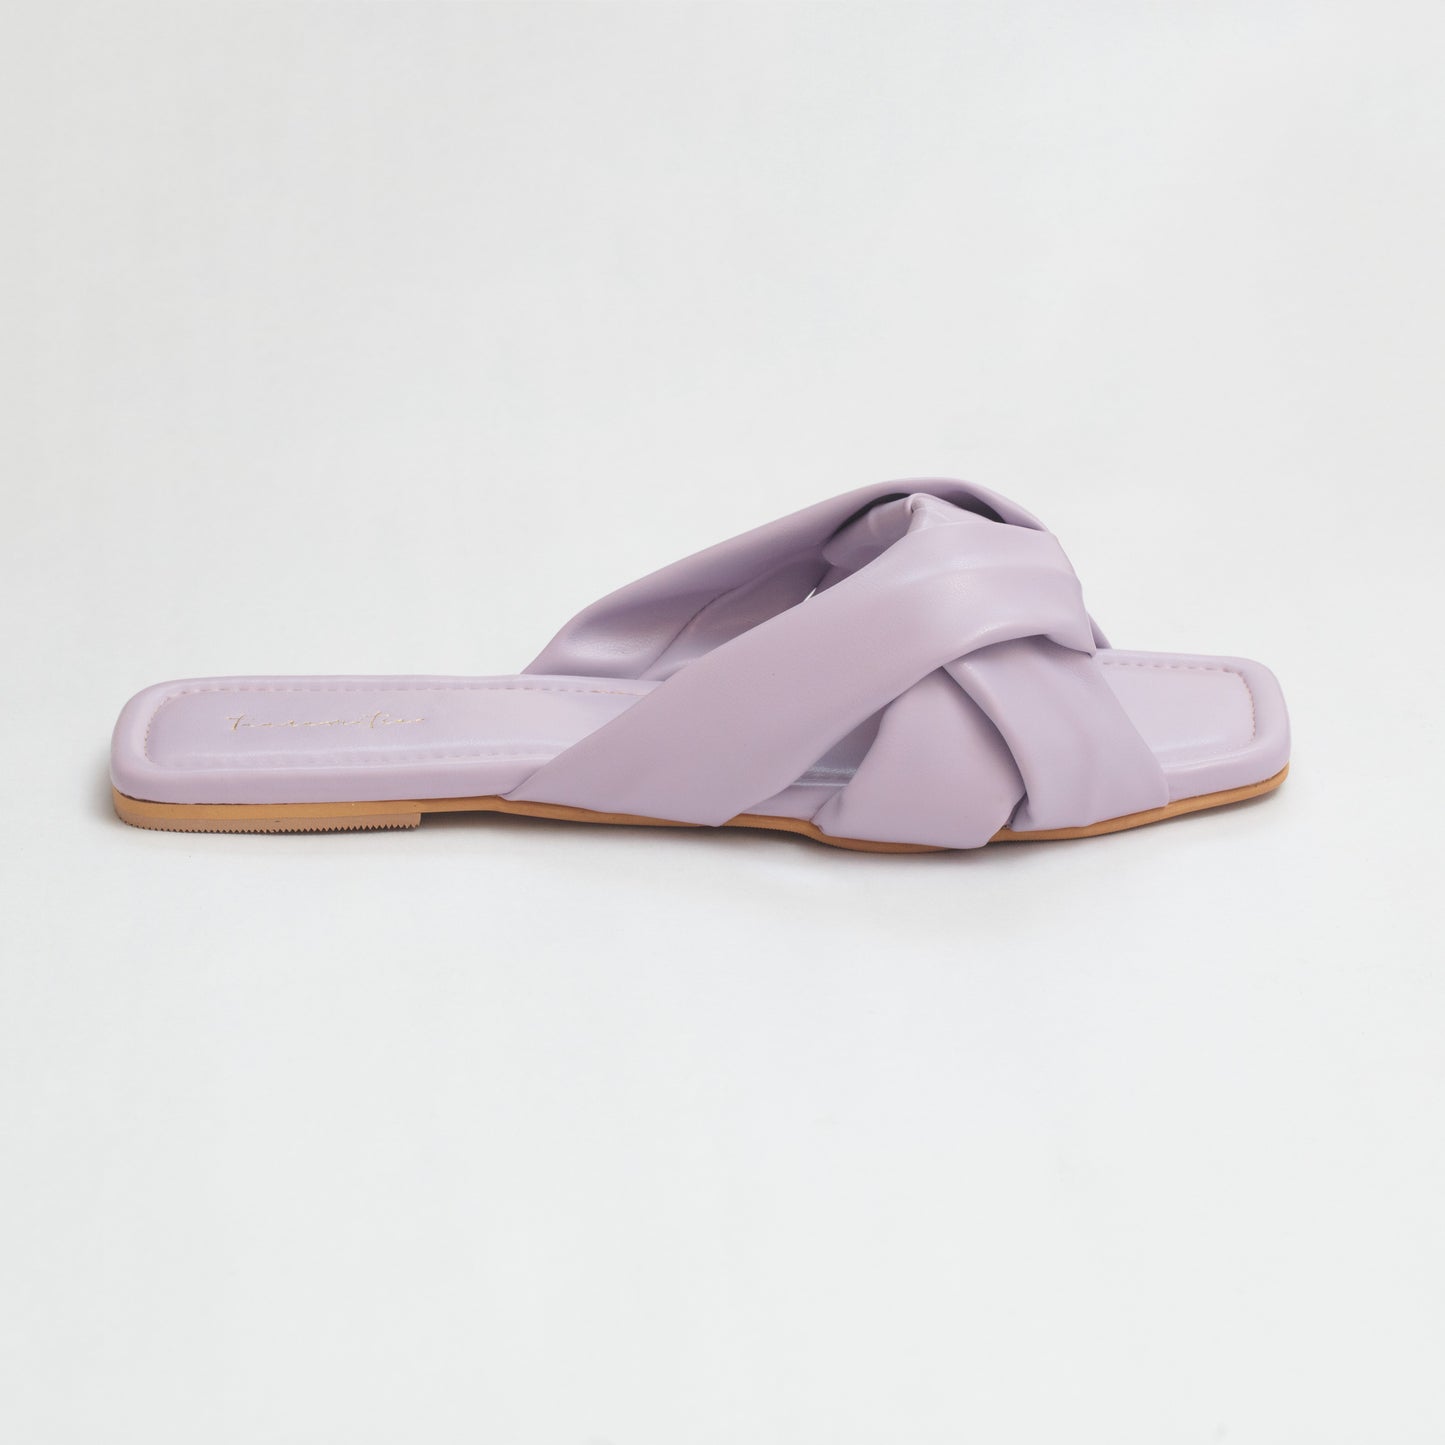 Knotted slider flats in Lilac